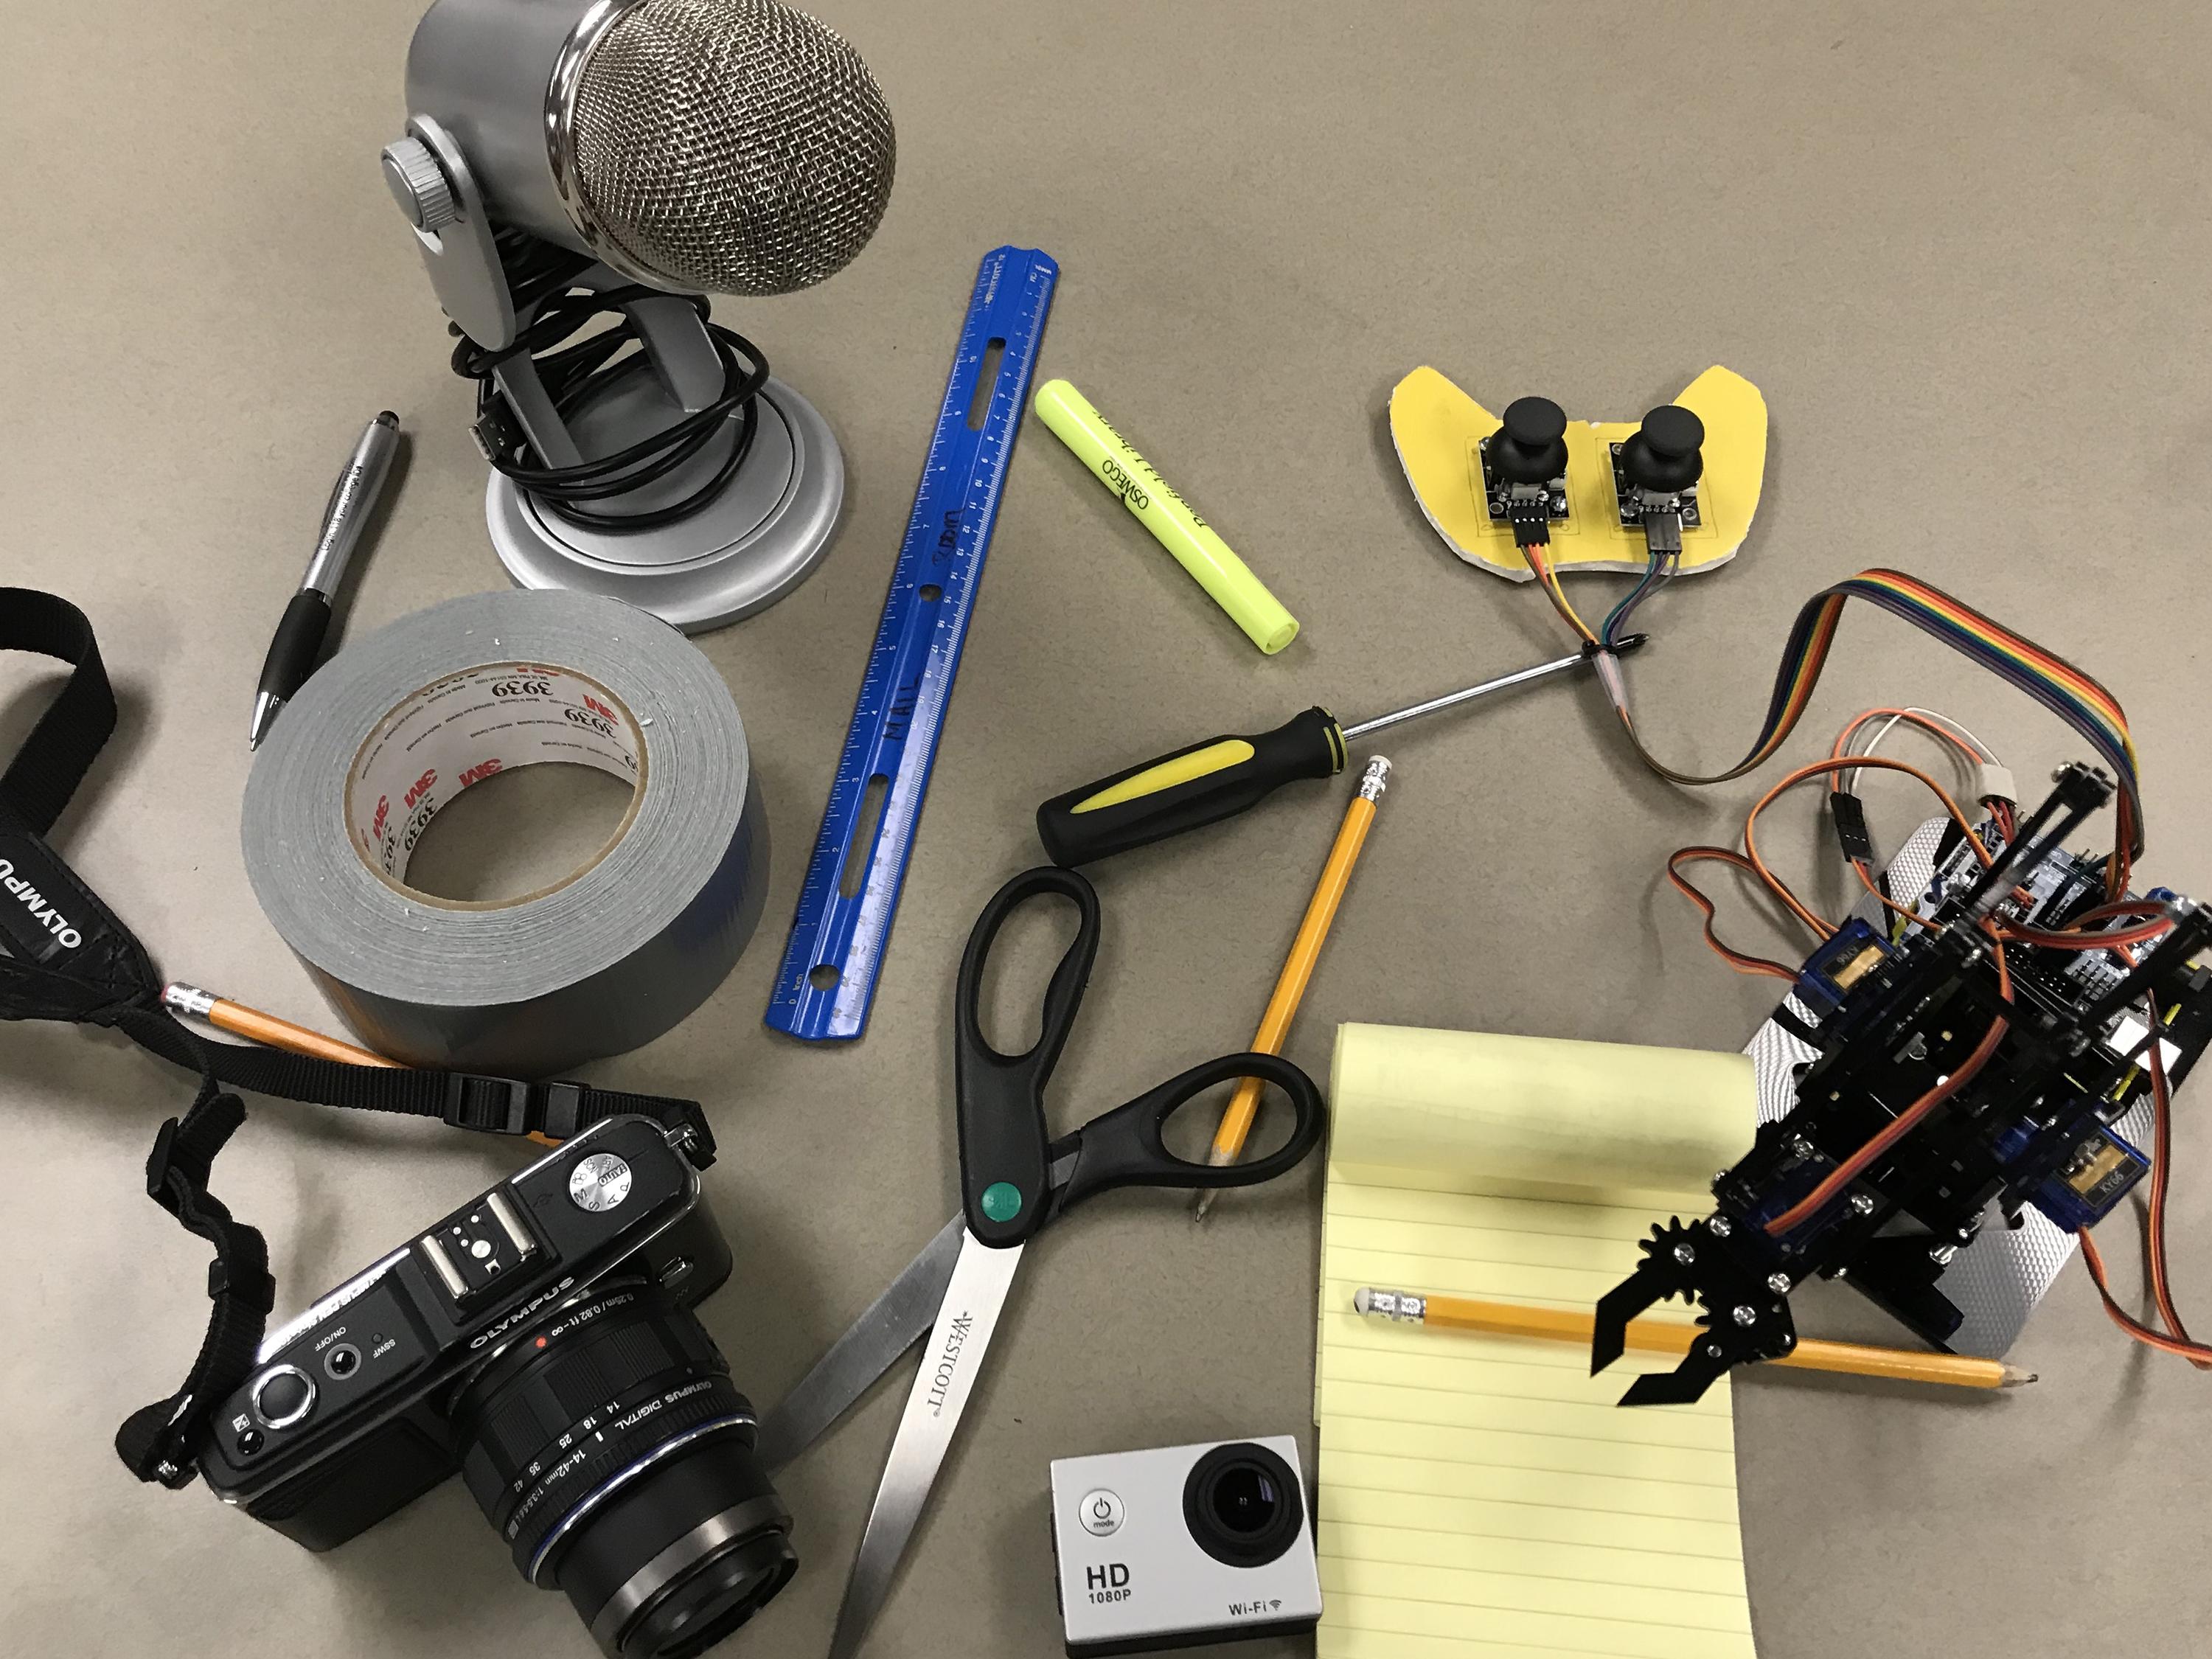 Items for drawing, filming, photographing making and more show the many paths attendees of the Makeathon can take